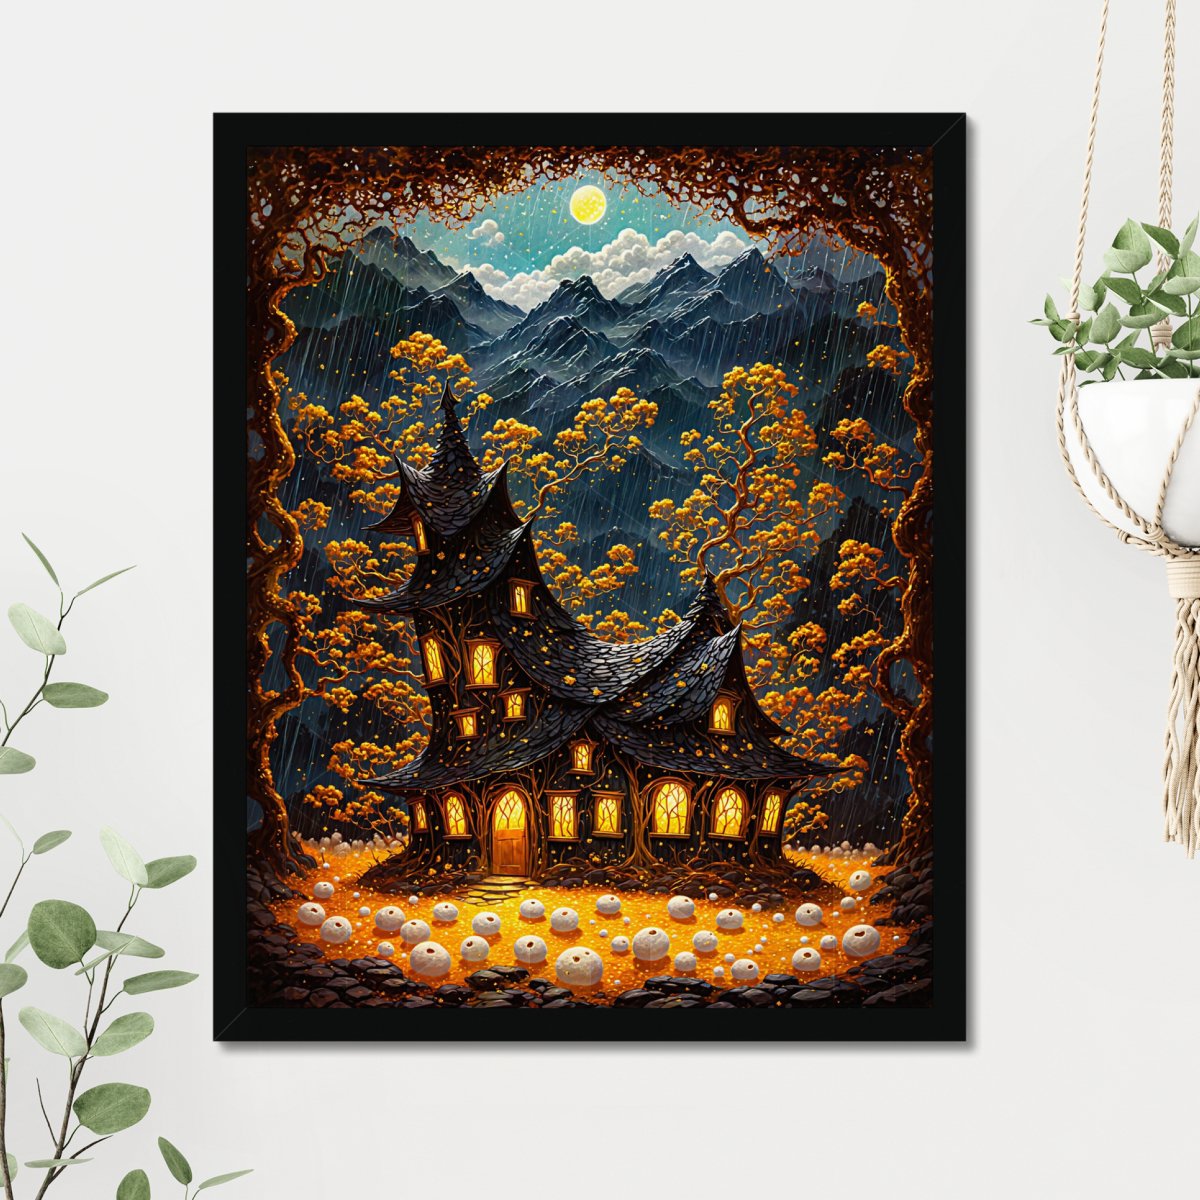 Amber drops - Art print - Poster - Ever colorful